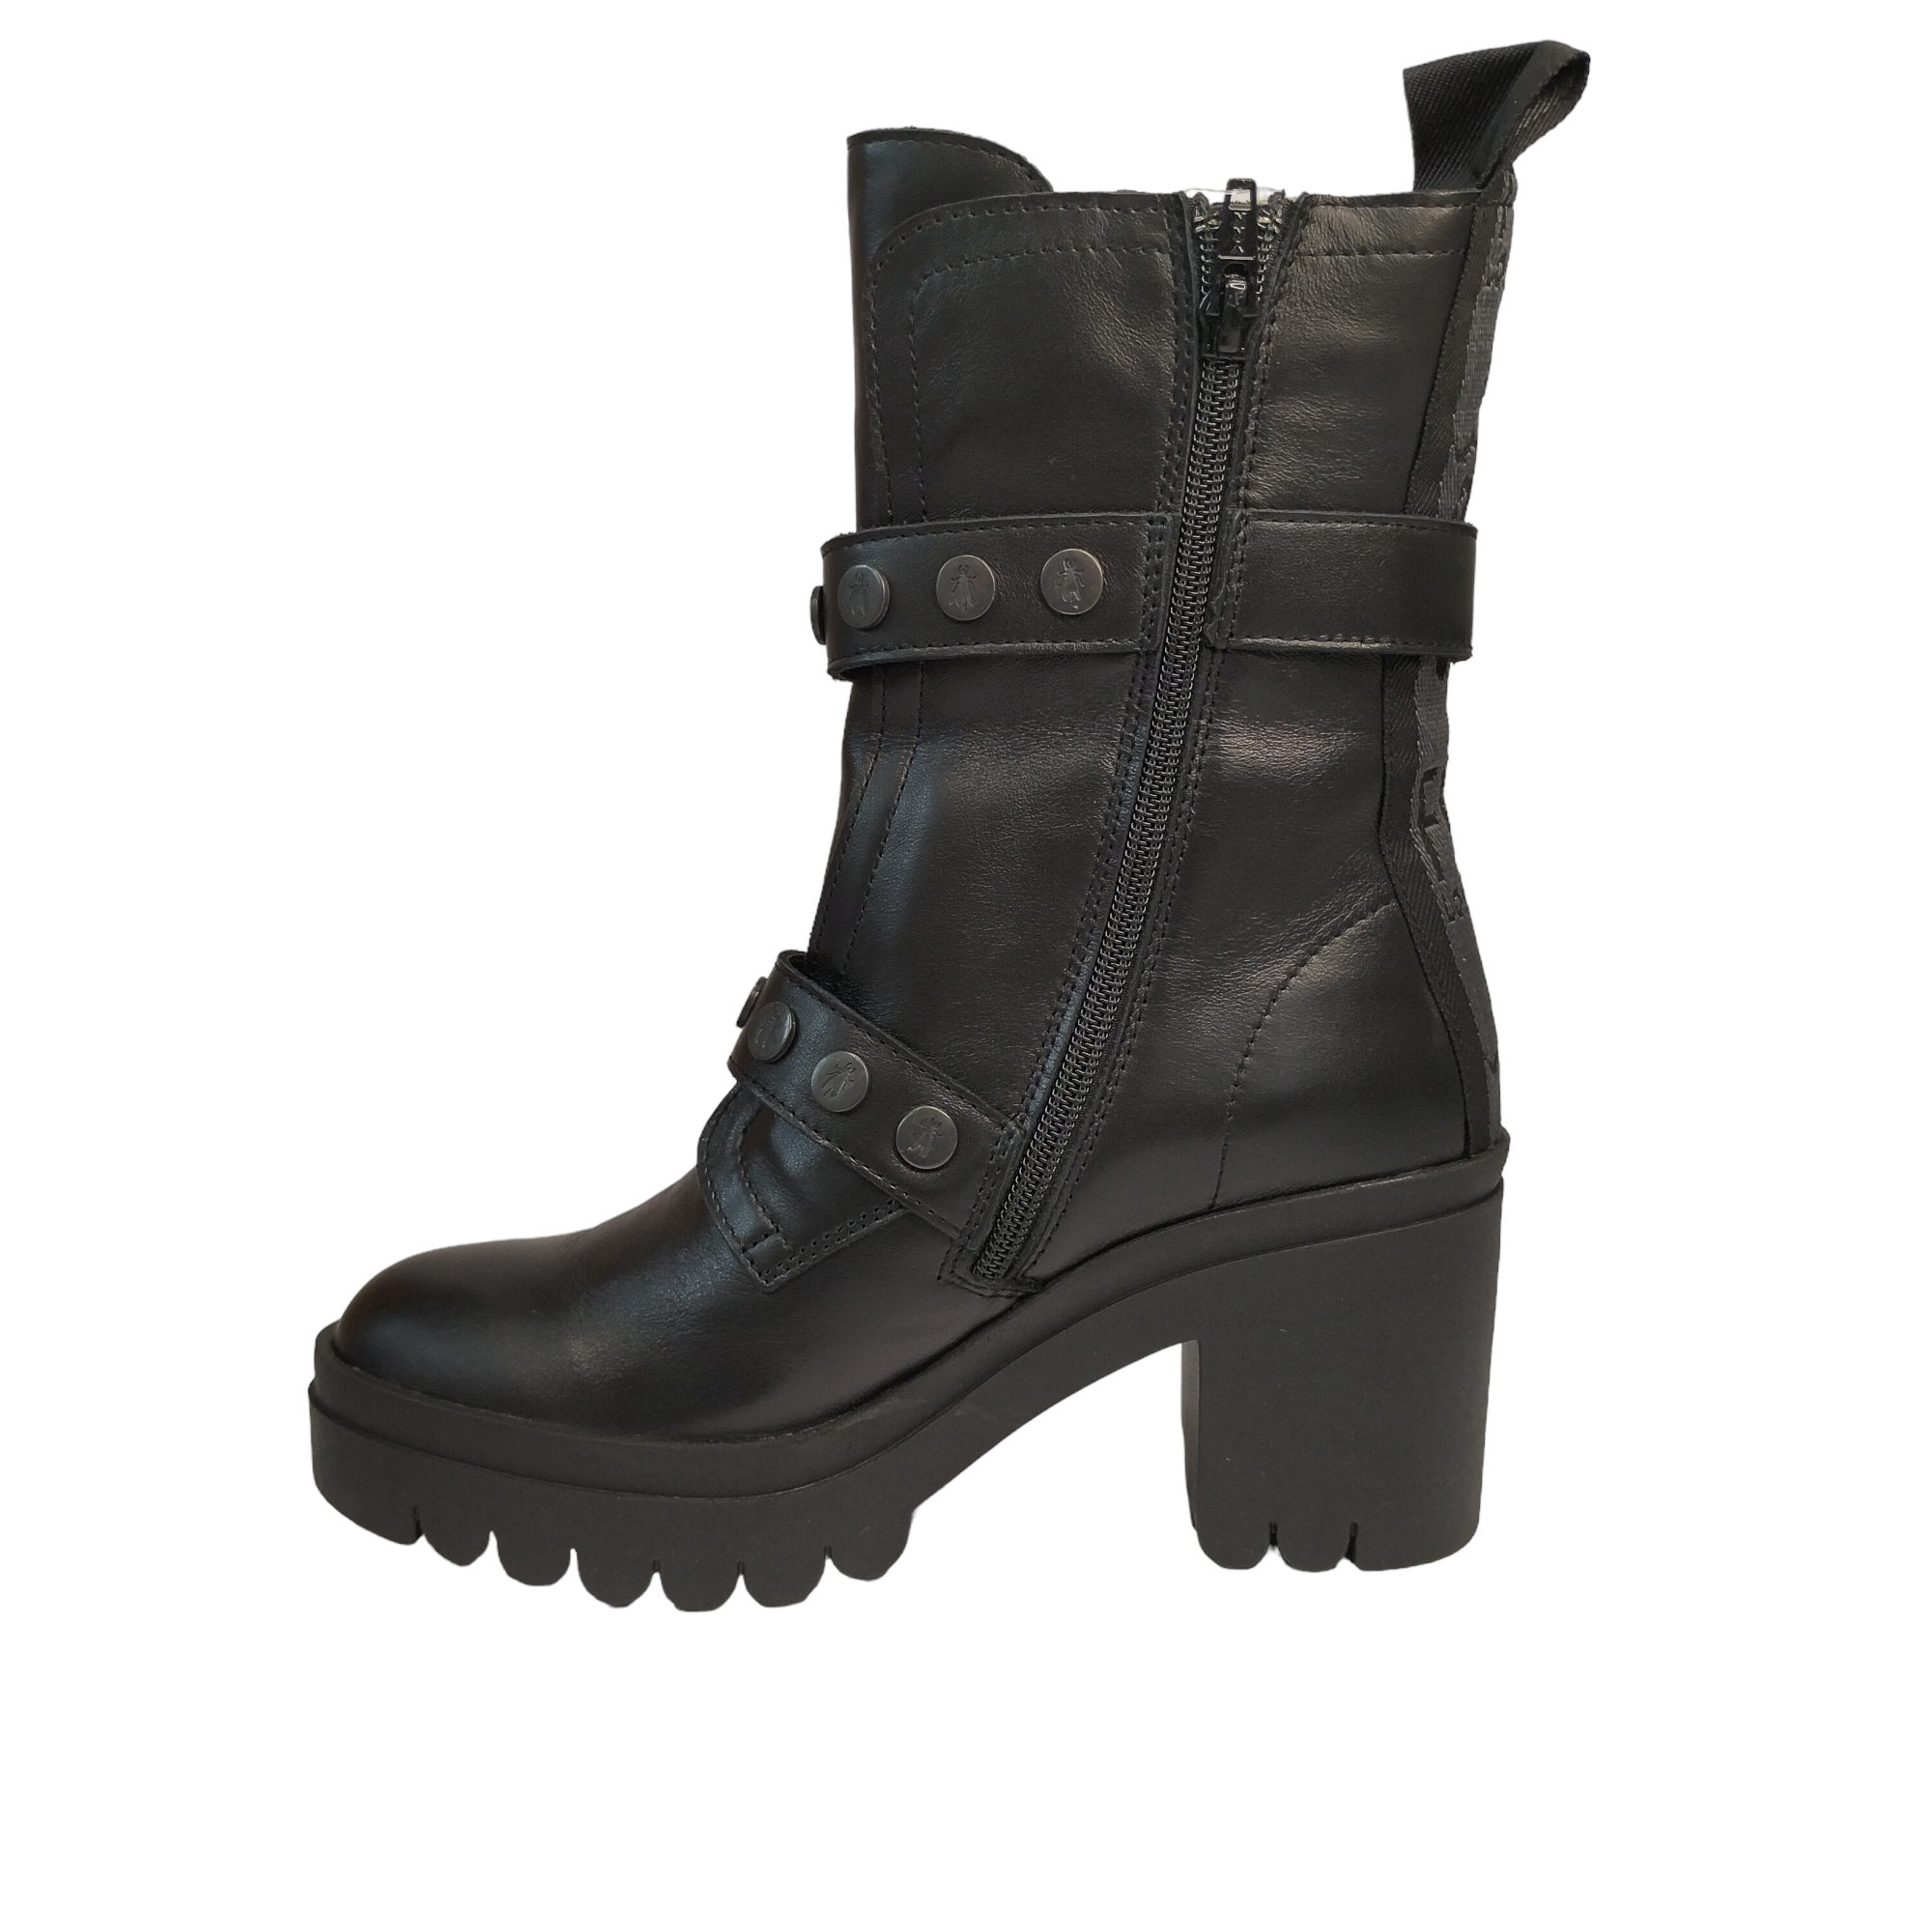 FLW23-Tama - shoe&me - Fly London - Boot - Boots, Winter, Womens